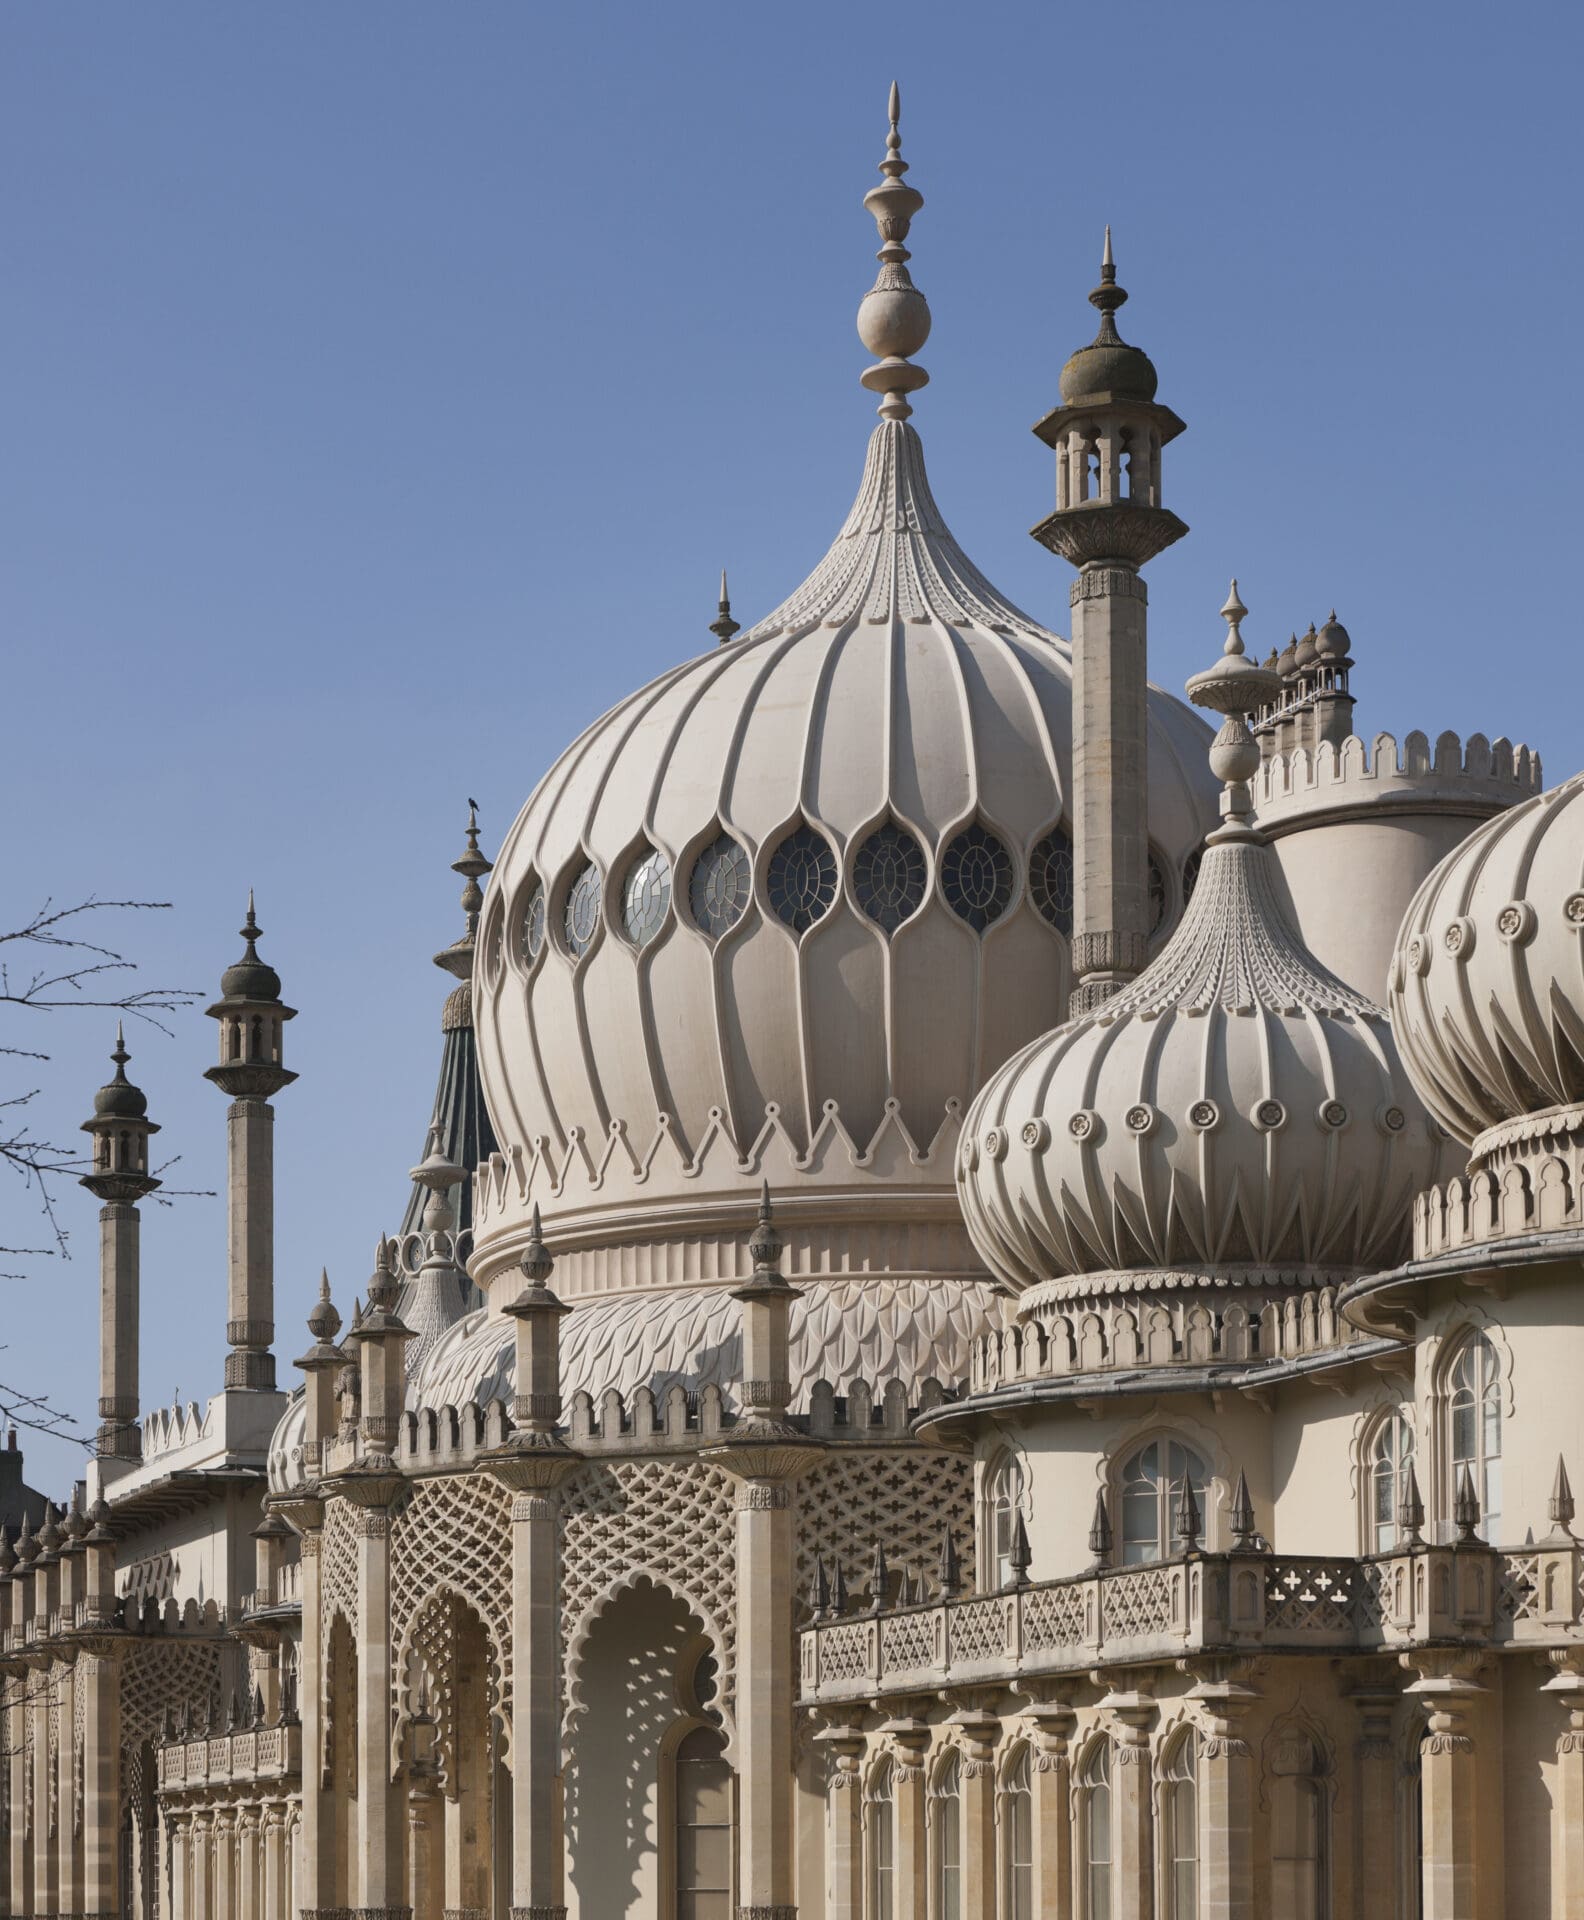 Things to do in Brighton | A sunny day at Brighton Pavilion, built in the Indo Saracenic style with white domes and minarets